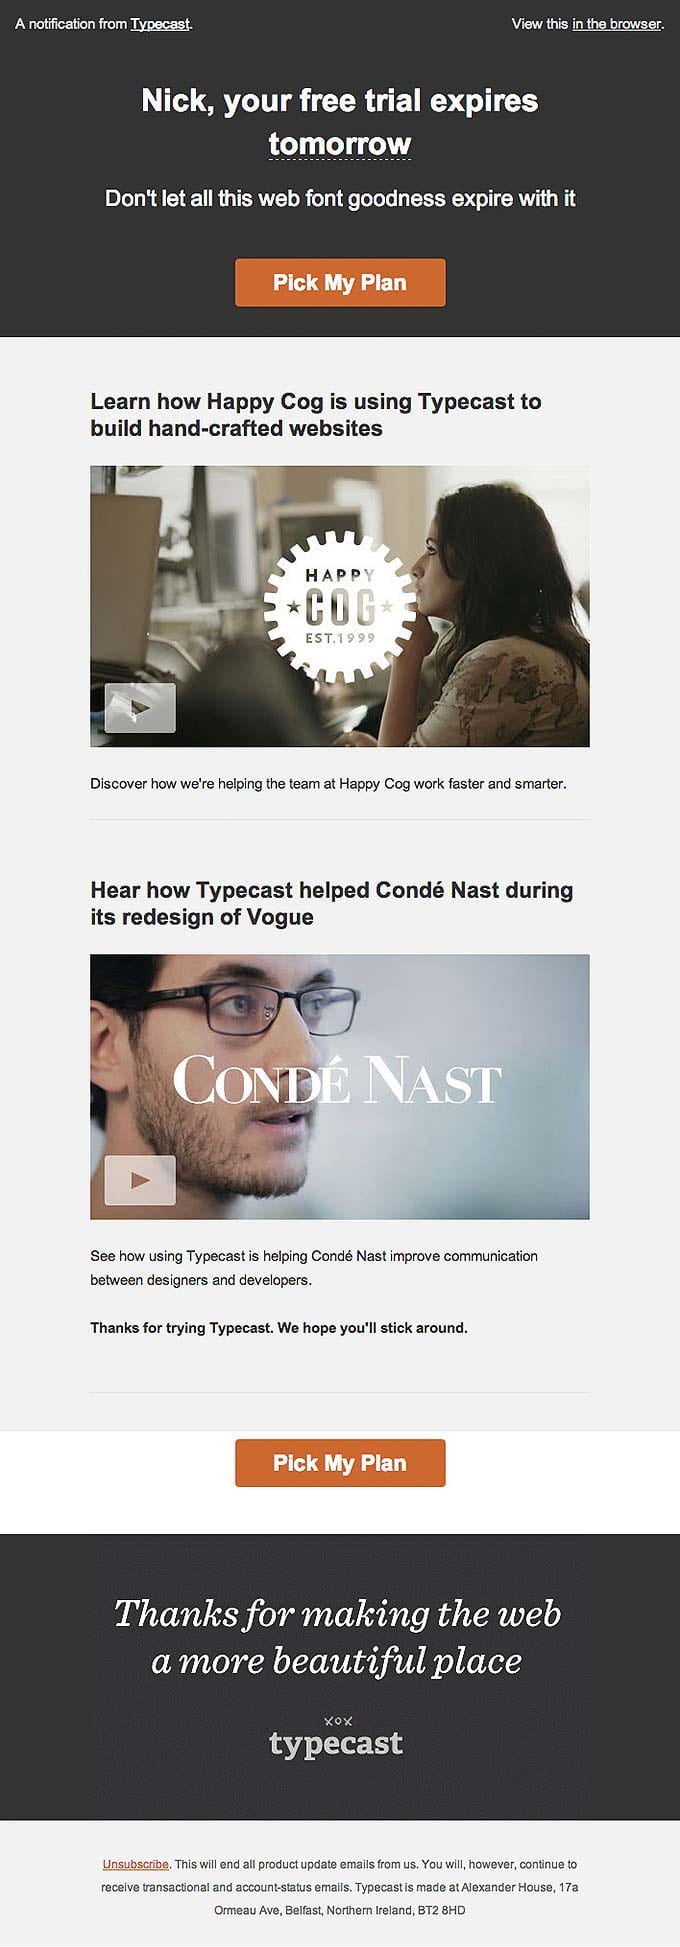 Onboarding Emails - Free Trial Ending Email Example - Typecast